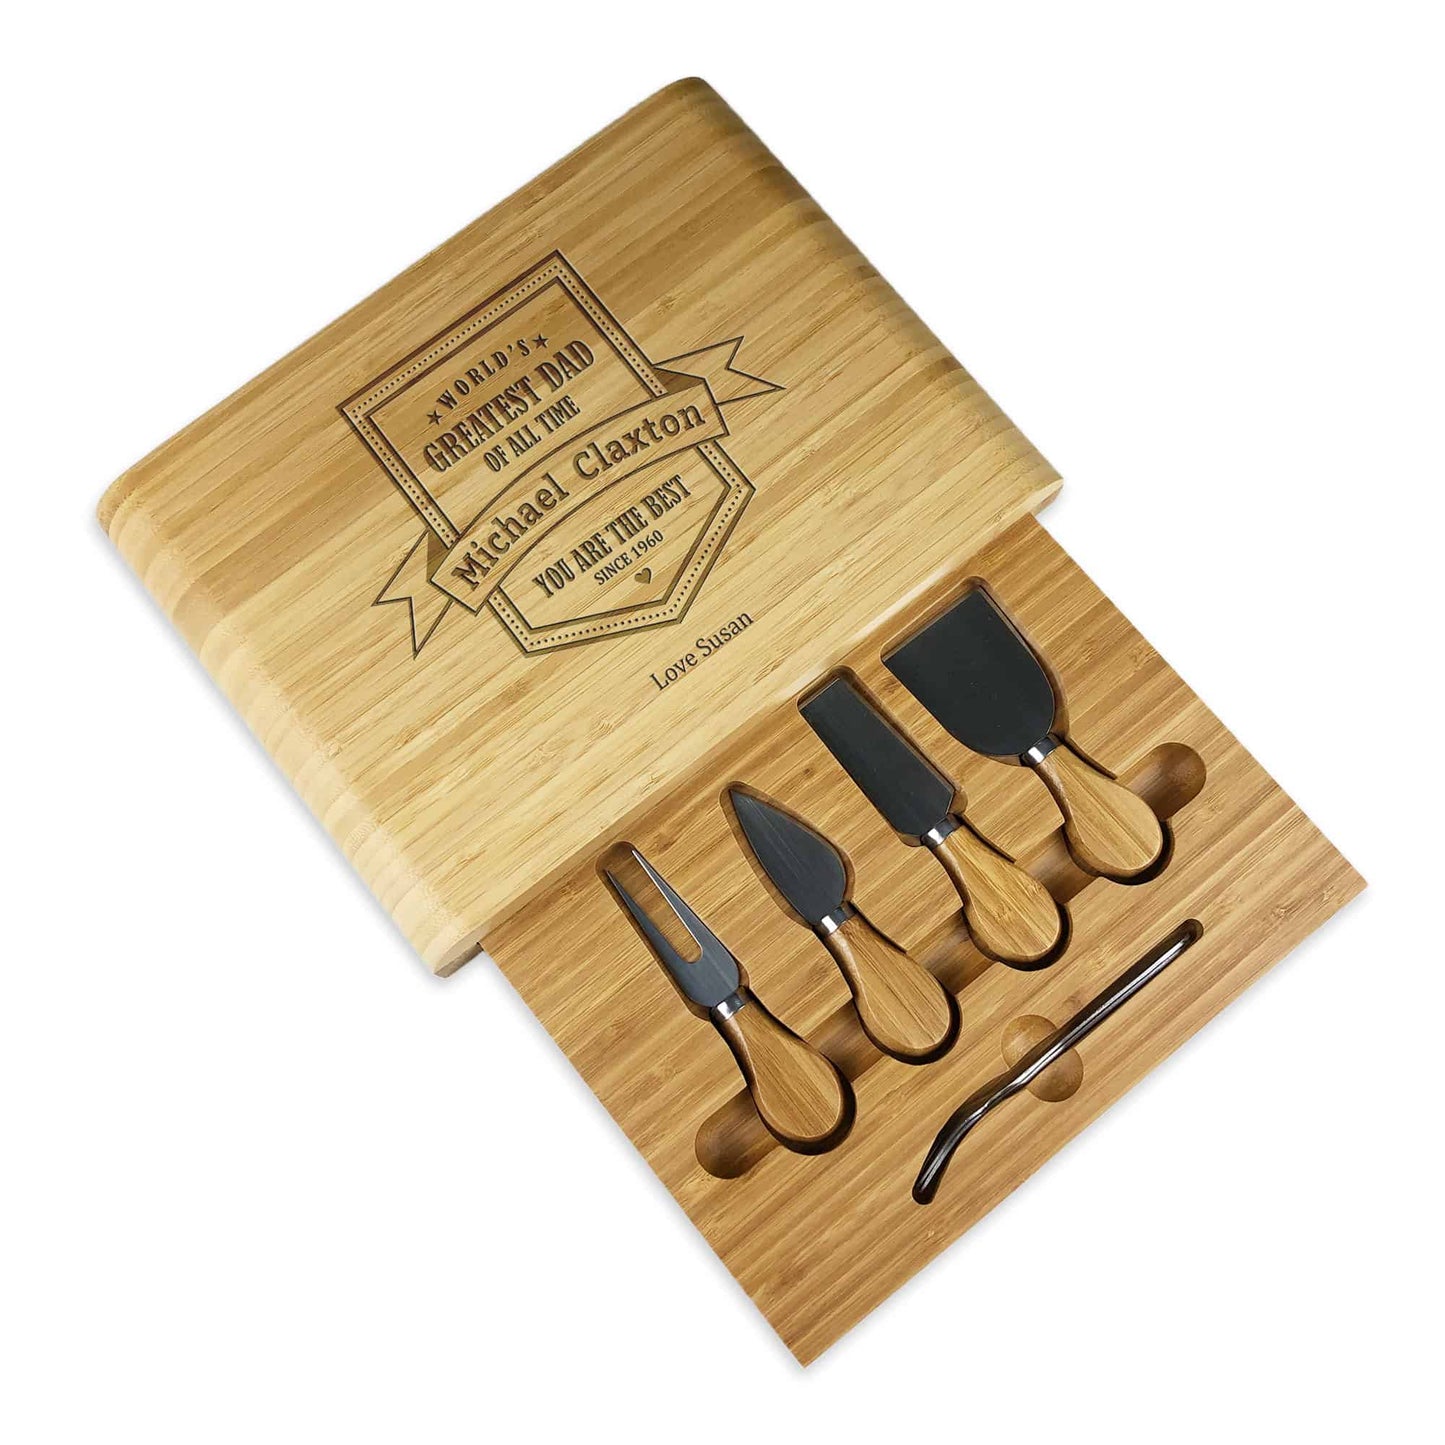 Worlds Greatest Dad Wooden Cheese Board & Knives Gift Set Fathers Day